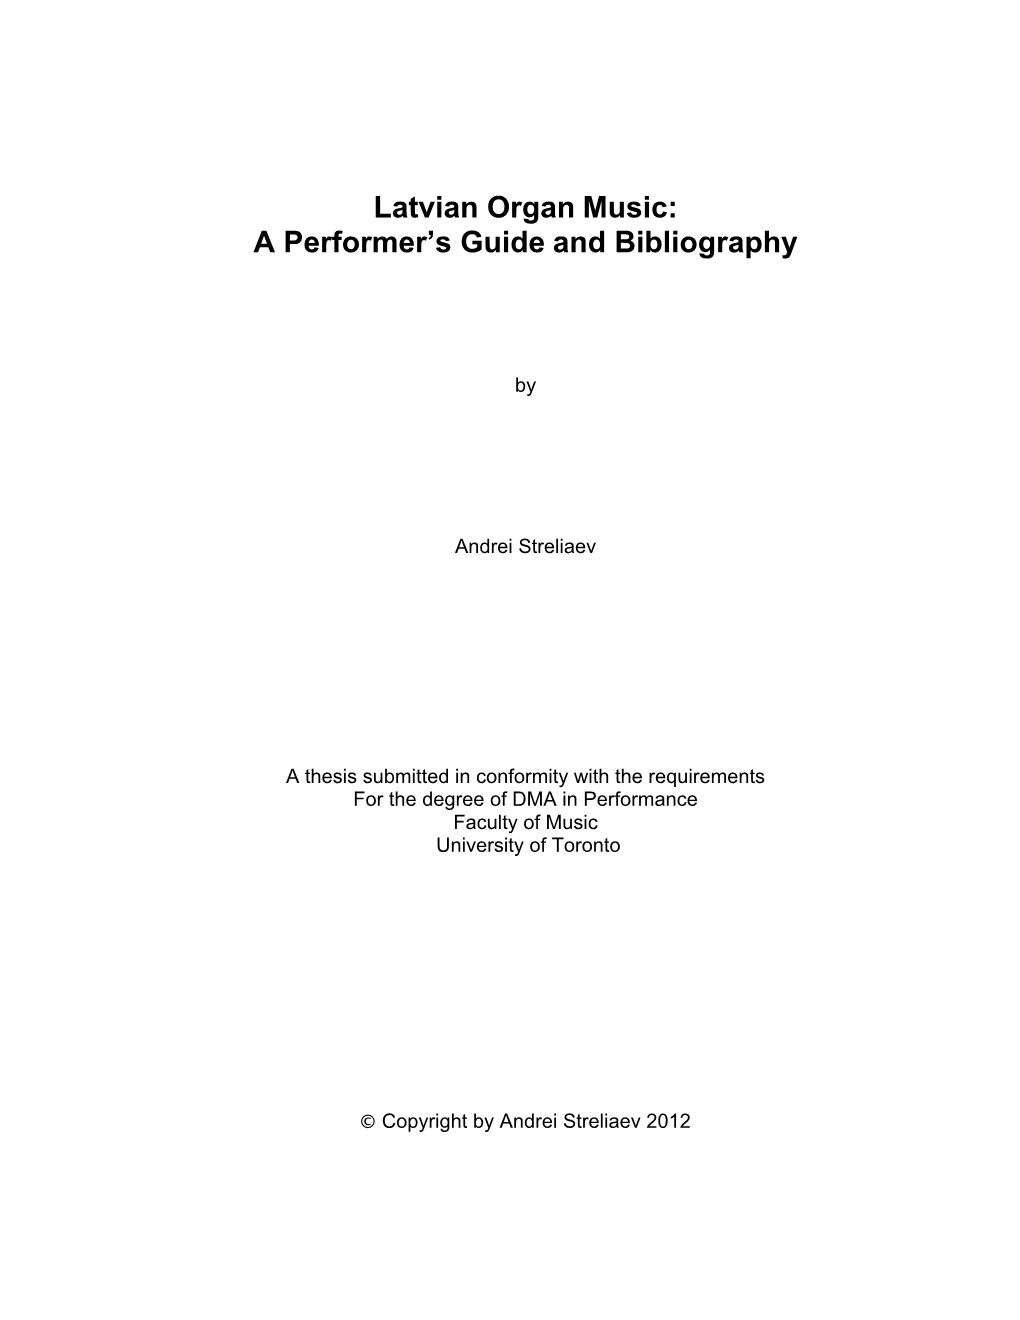 Latvian Organ Music: a Performer's Guide and Bibliography